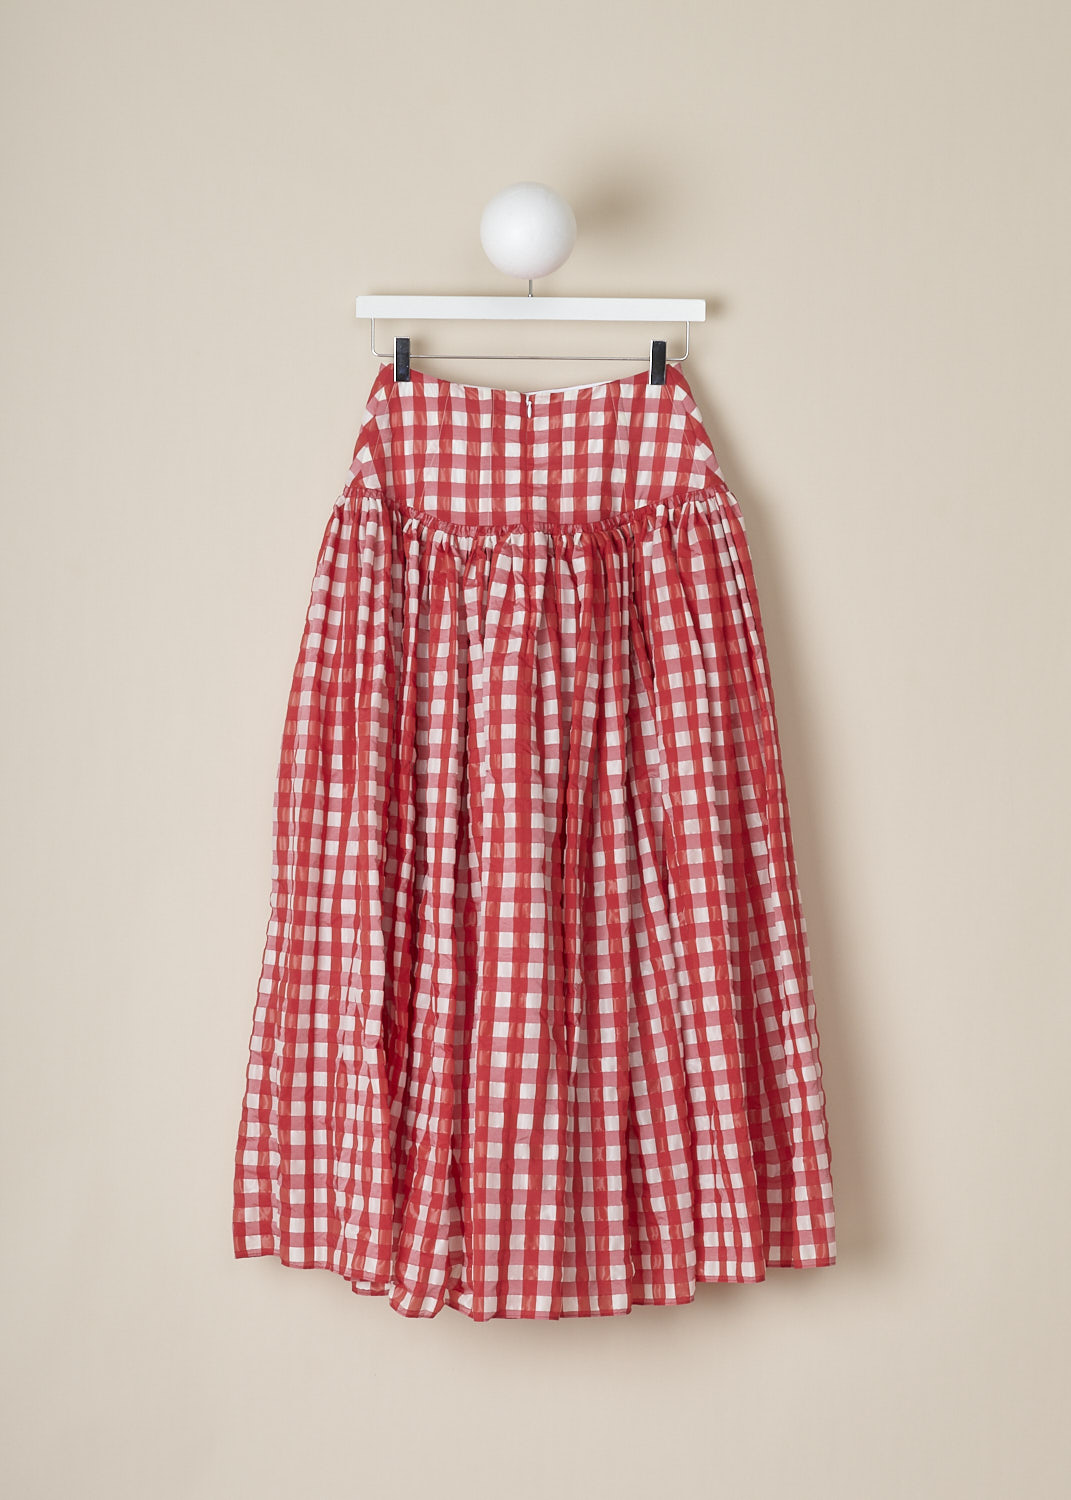 ALAÏA, RED GINGHAM MAXI SKIRT, AA9J04644T577, Red, White, Print, Back, This high-waisted red gingham maxi skirt hugs the waist and flares out to a voluminous maxi skirt. The skirt has concealed slanted pockets. In the back, a concealed centre zip functions as the closure option. 

